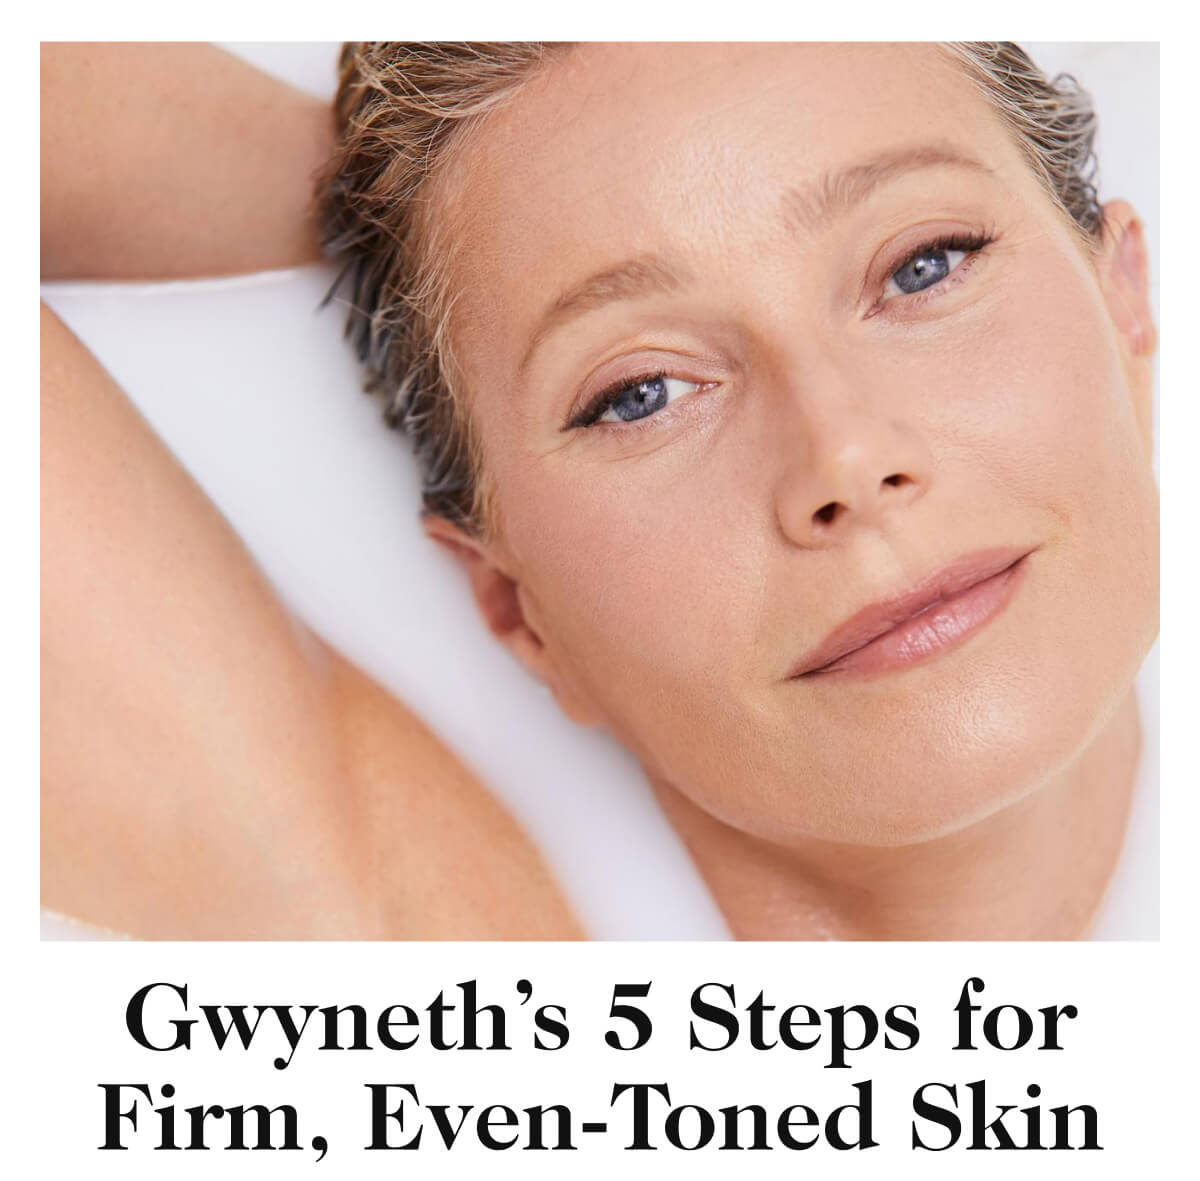 Gwyneth’s 5 Steps for Firm, Even-Toned Skin